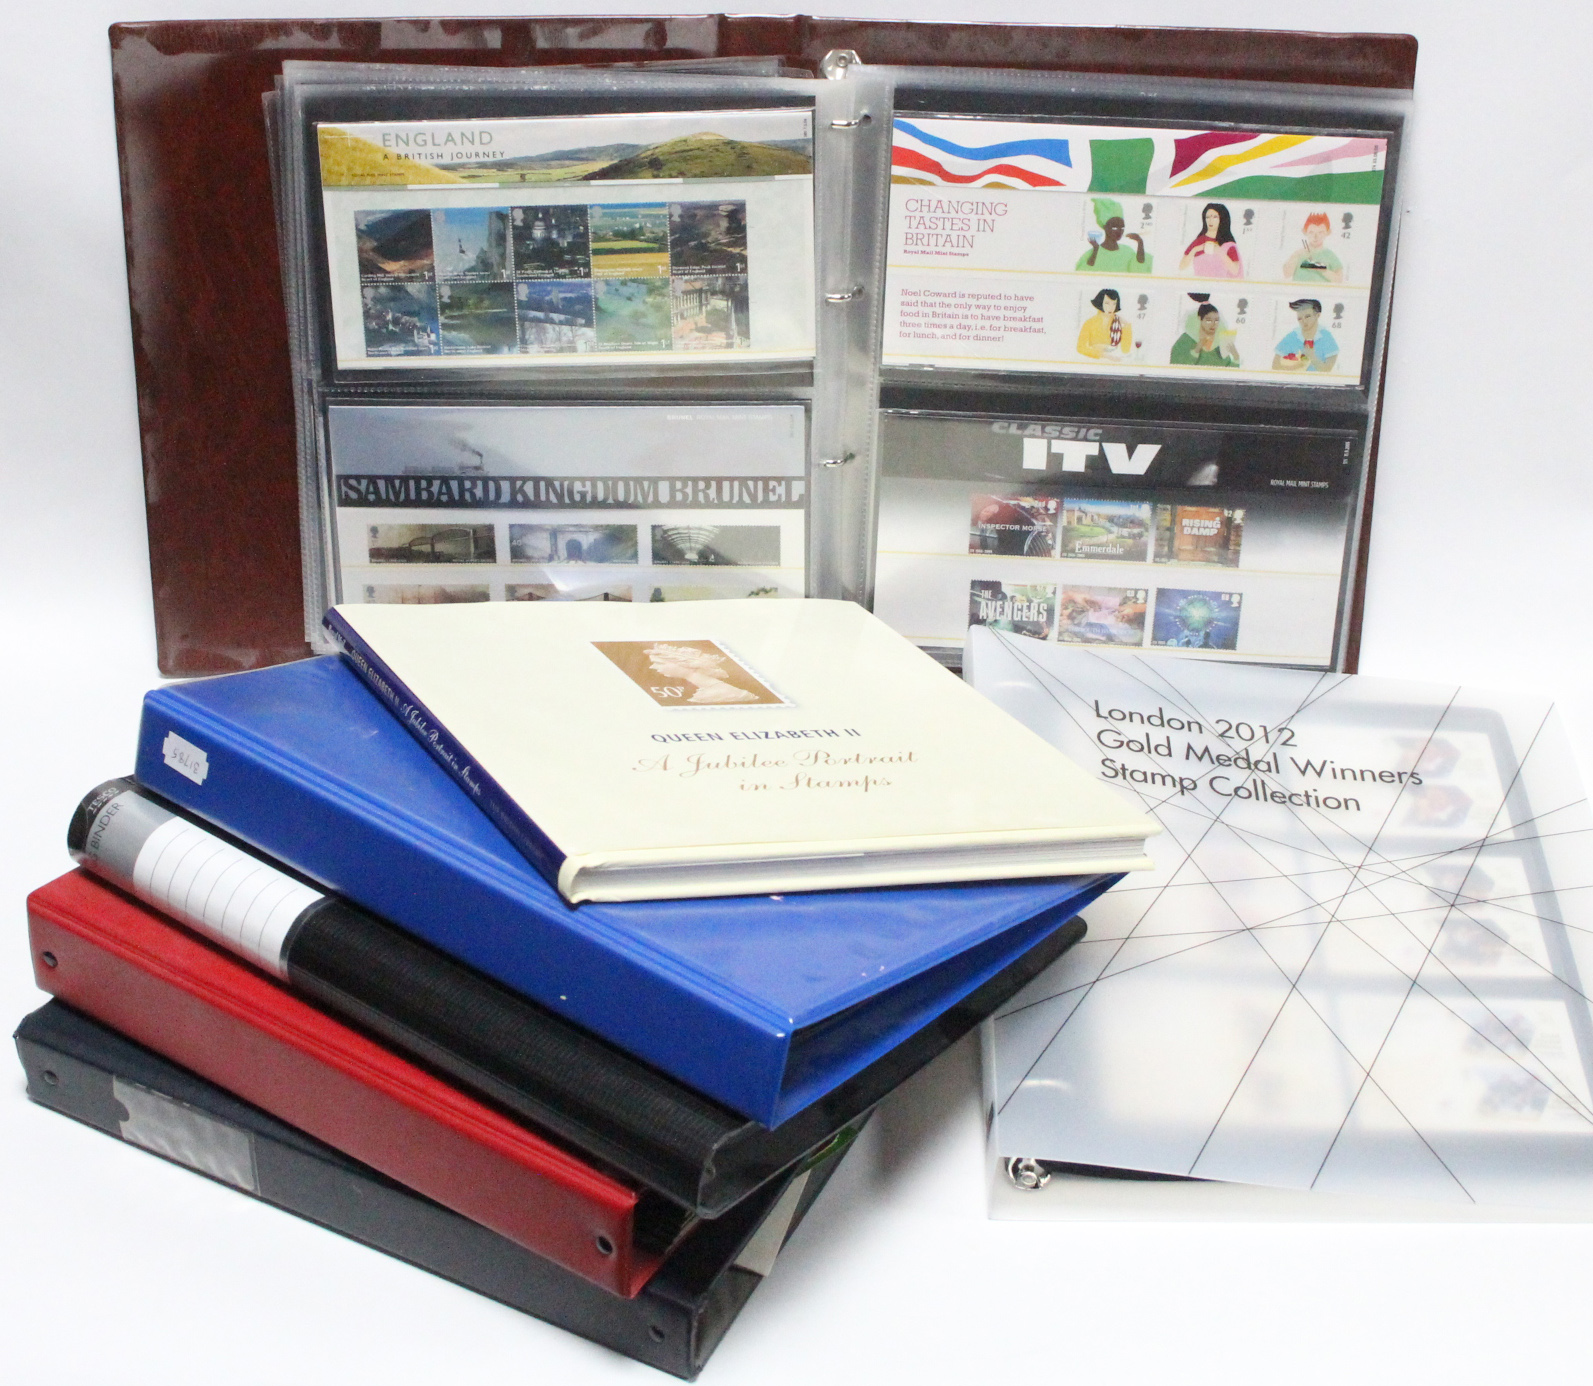 A collection of GB, Commonwealth, & foreign stamps; a “London 2012 Gold Medal Winners” stamp